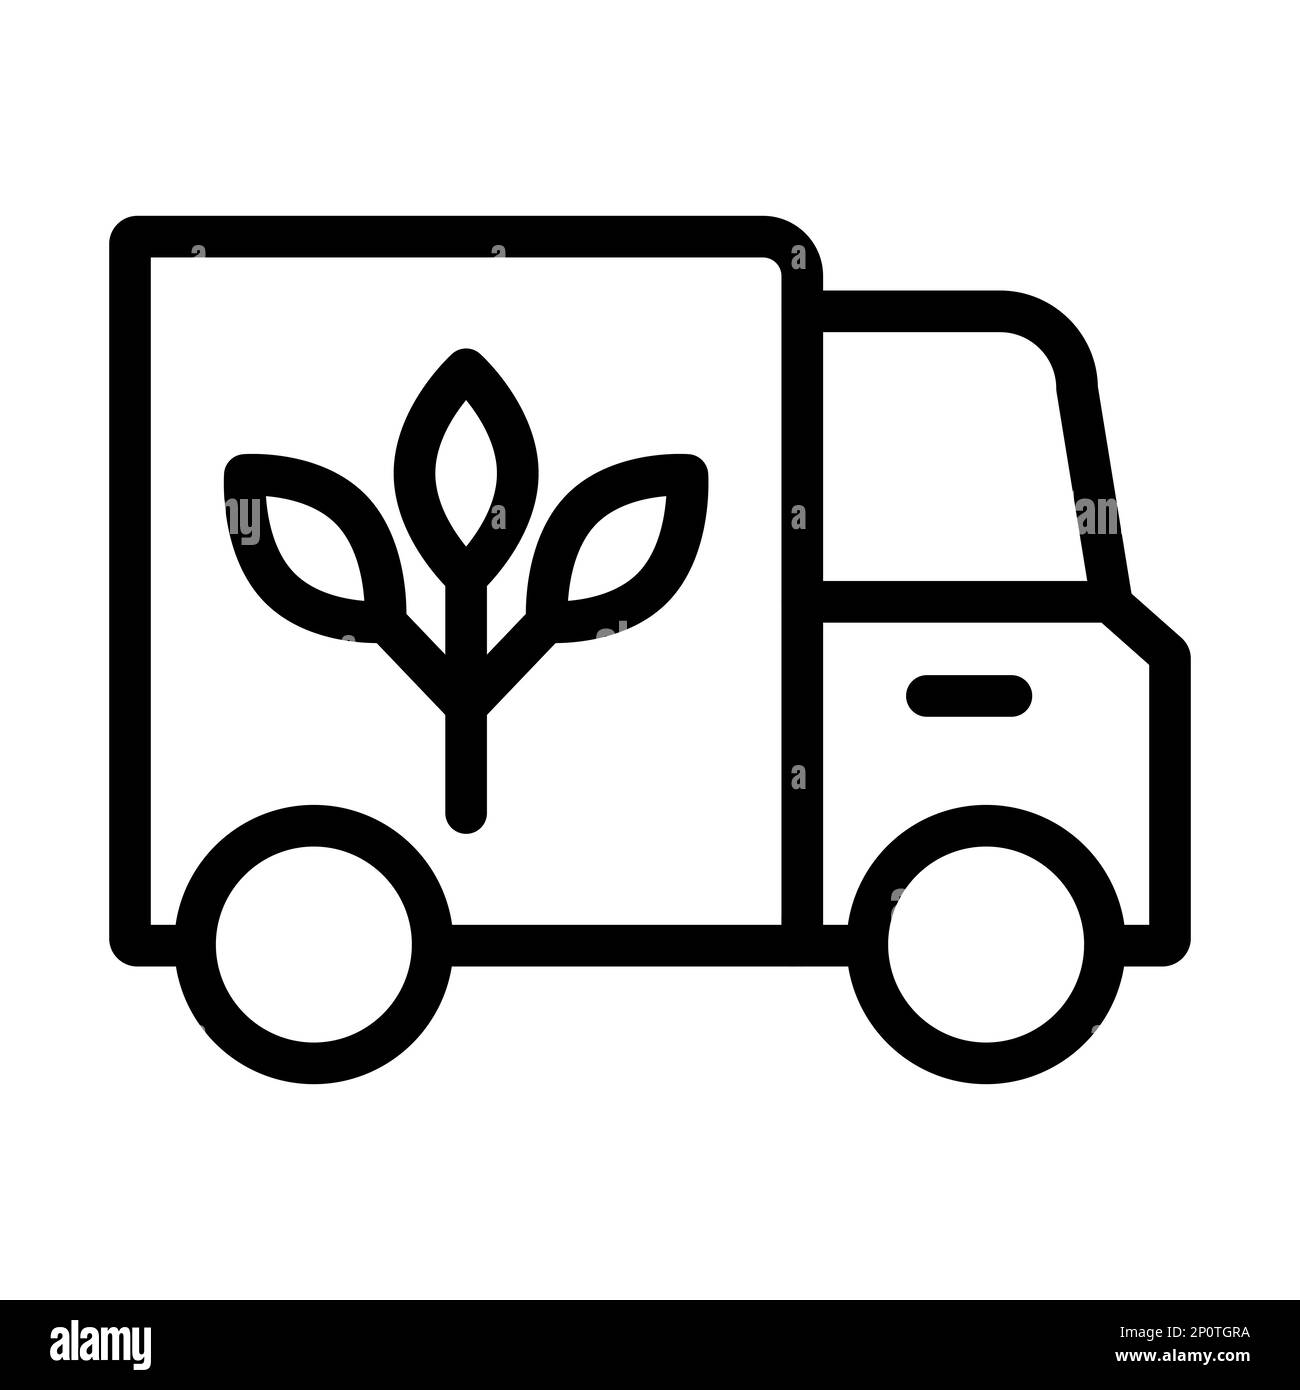 Sustainable Transportation Vector Thick Line Icon For Personal And Commercial Use. Stock Photo